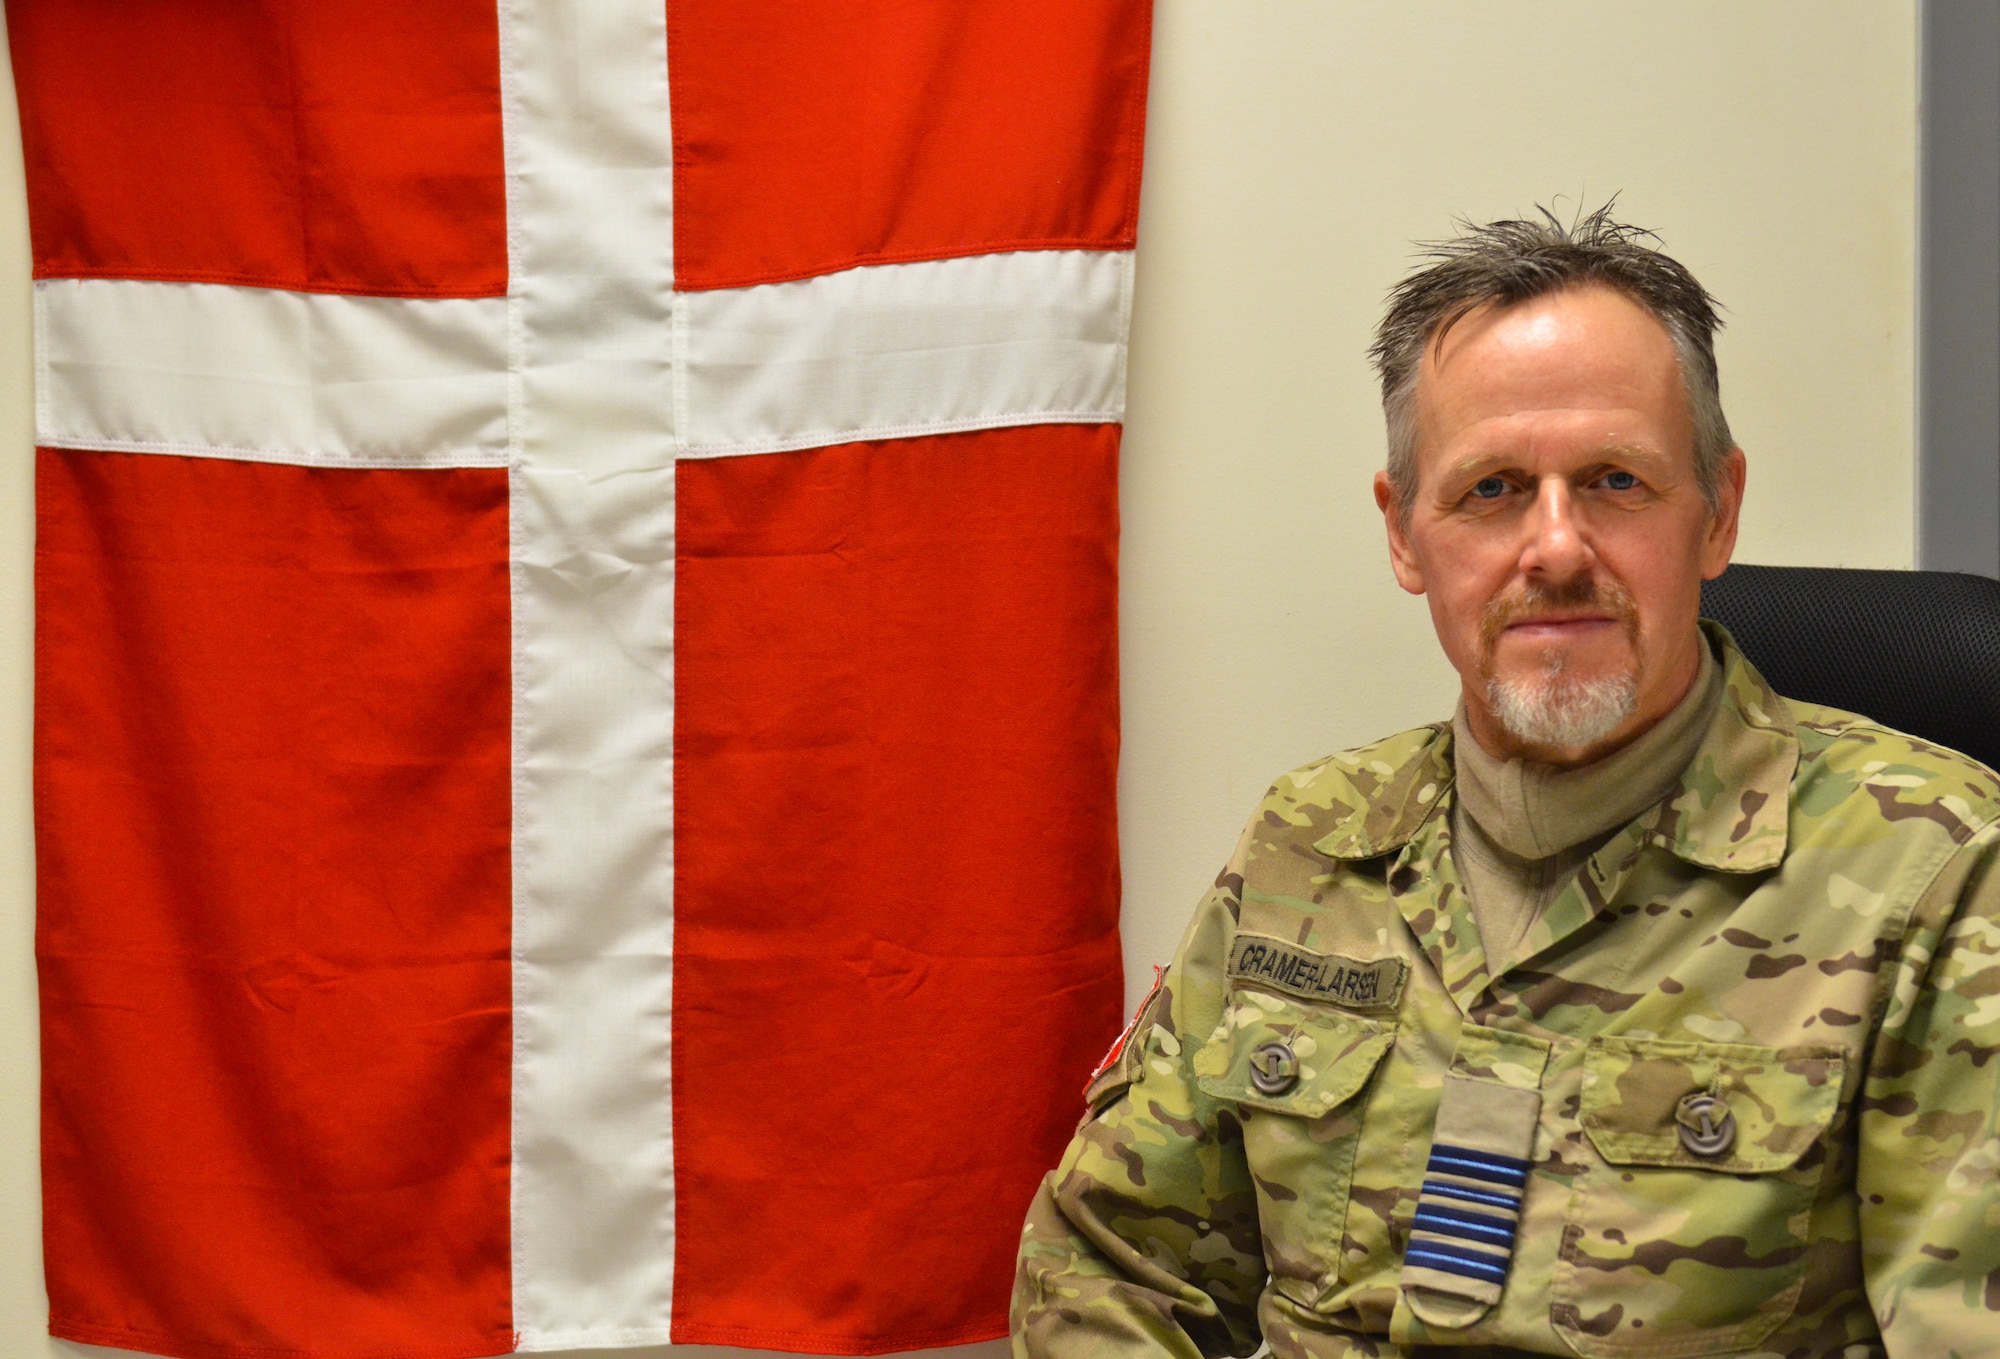 Royal Danish Air Force Lt. Col. Lars Cramer-Larsen, RDAF chief coalition strategist, sits in his office in the Combined Air Operations Center  at Al Udeid Air Base, Qatar, Jan. 16, 2019. Cramer-Larsen has hosted several informal lectures about the Middle East throughout the base to provide his expertise and research to coalition audiences. (U.S. Air Force Photo by Senior Airman Travis Beihl)